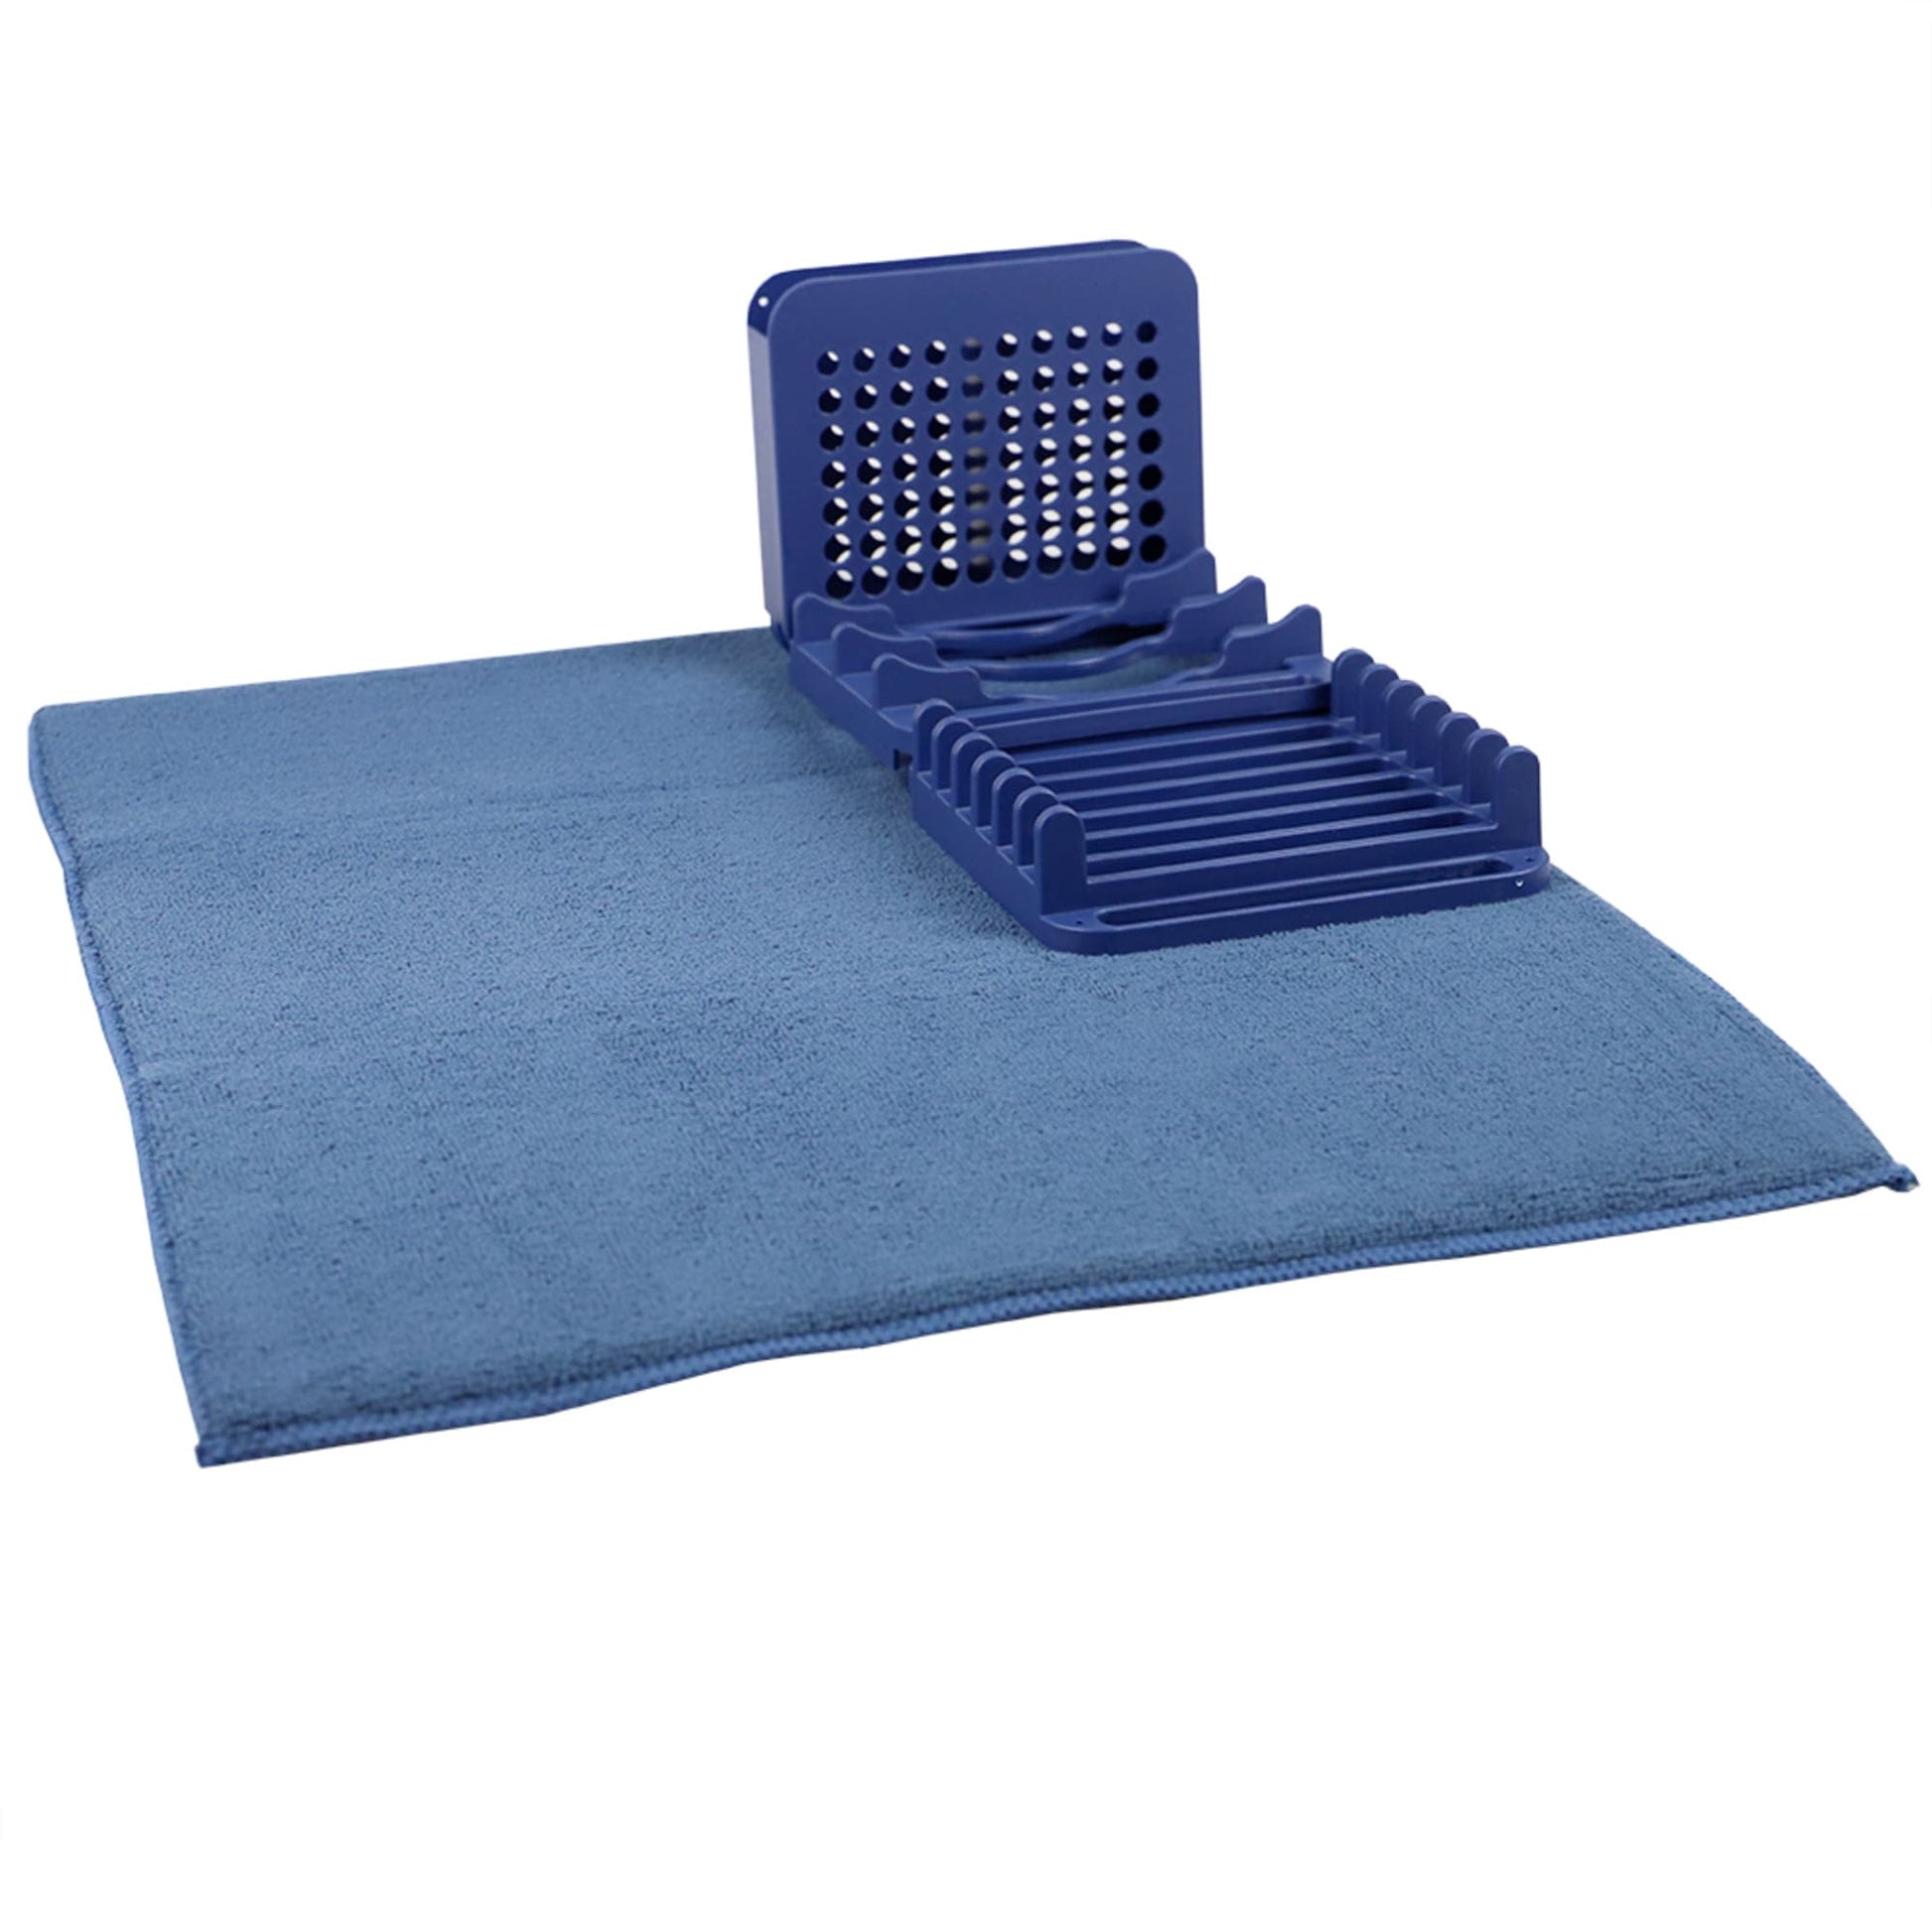 Kitchen towel bar mat for drying Dishes Brand new Microfiber